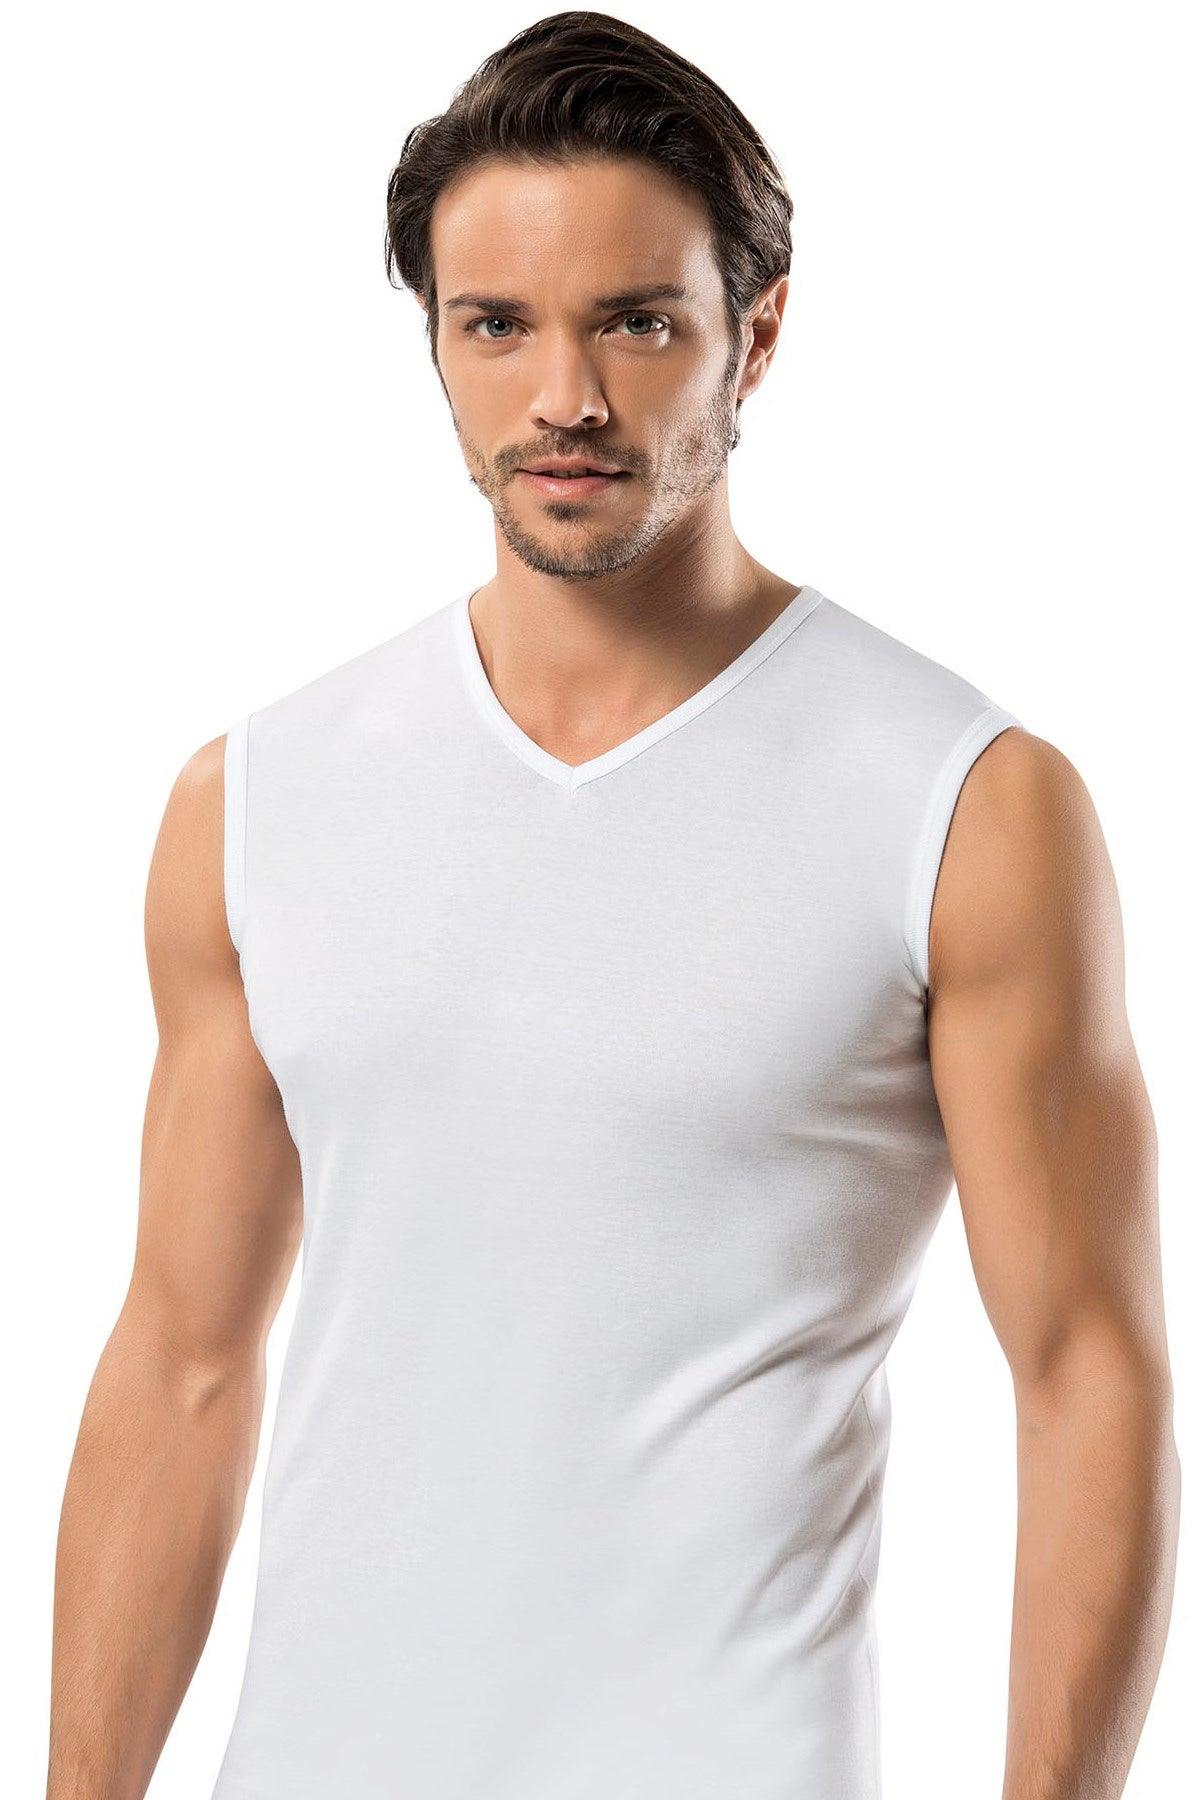 Sleeveless Tops For Broad Shoulders